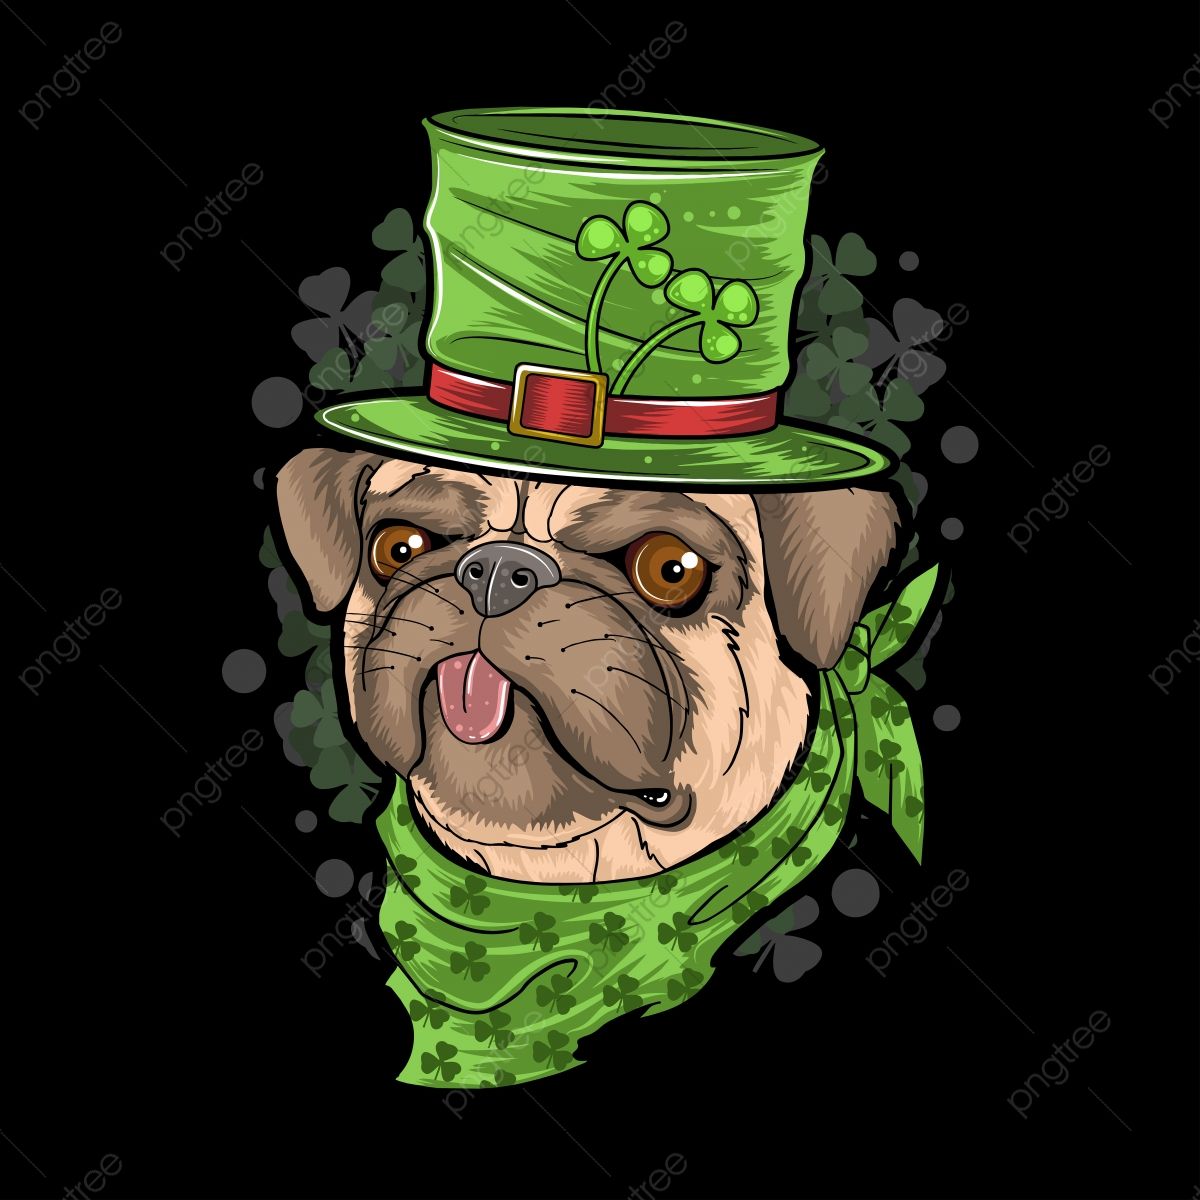 St Patrick S Day Pug Puppy Dog Artwork Vector, Cute Dog, Pug Puppy, St Patricks Day Background PNG and Vector with Transparent Background for Free Download